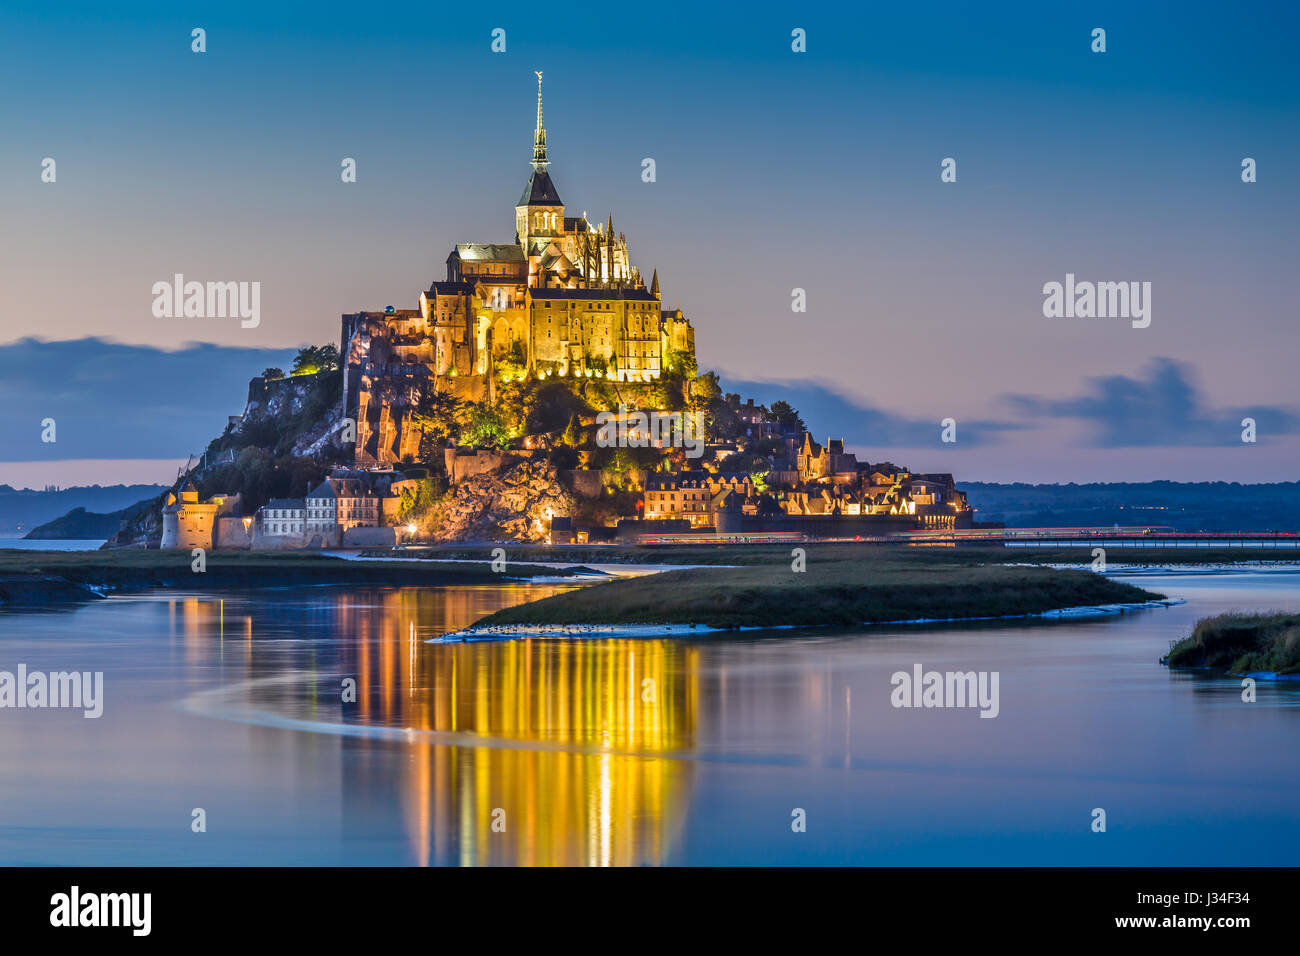 Beautiful view of famous Le Mont Saint-Michel tidal island in beautiful twilight during blue hour at dusk, Normandy, northern France Stock Photo